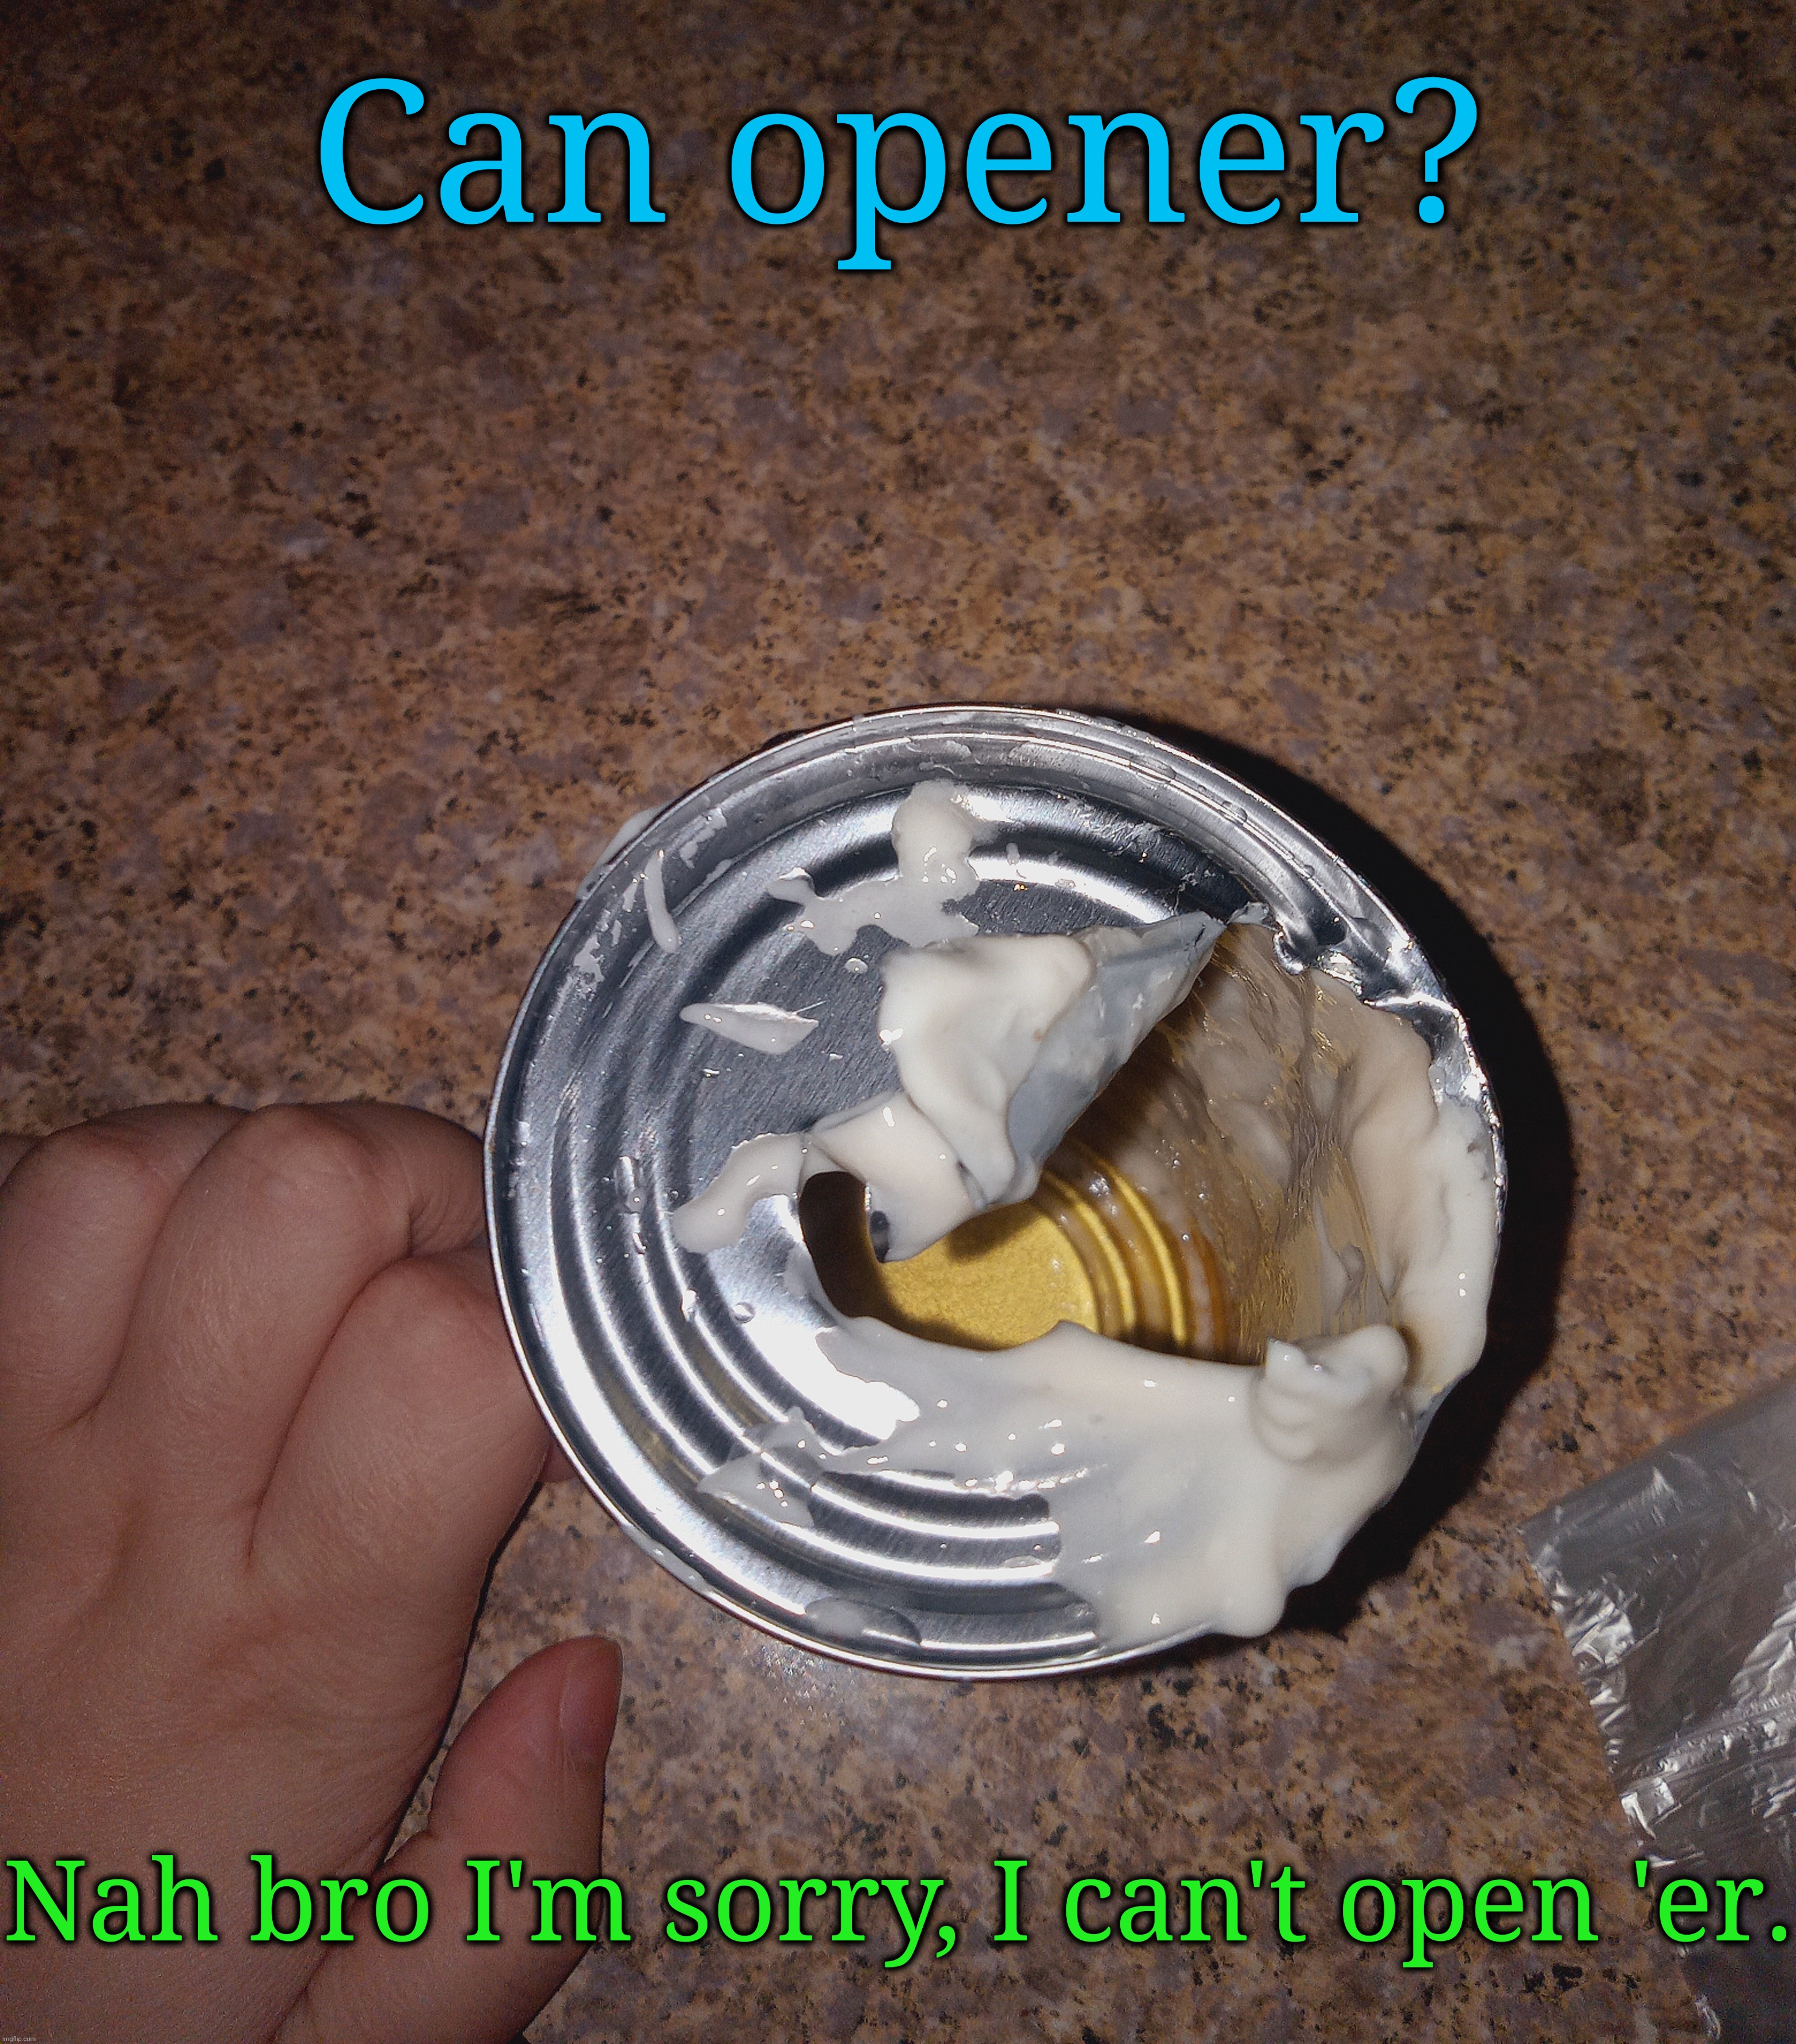 Sorry, bit of a dad joke | Can opener? Nah bro I'm sorry, I can't open 'er. | image tagged in cans,soup,can opener,the struggle is real | made w/ Imgflip meme maker